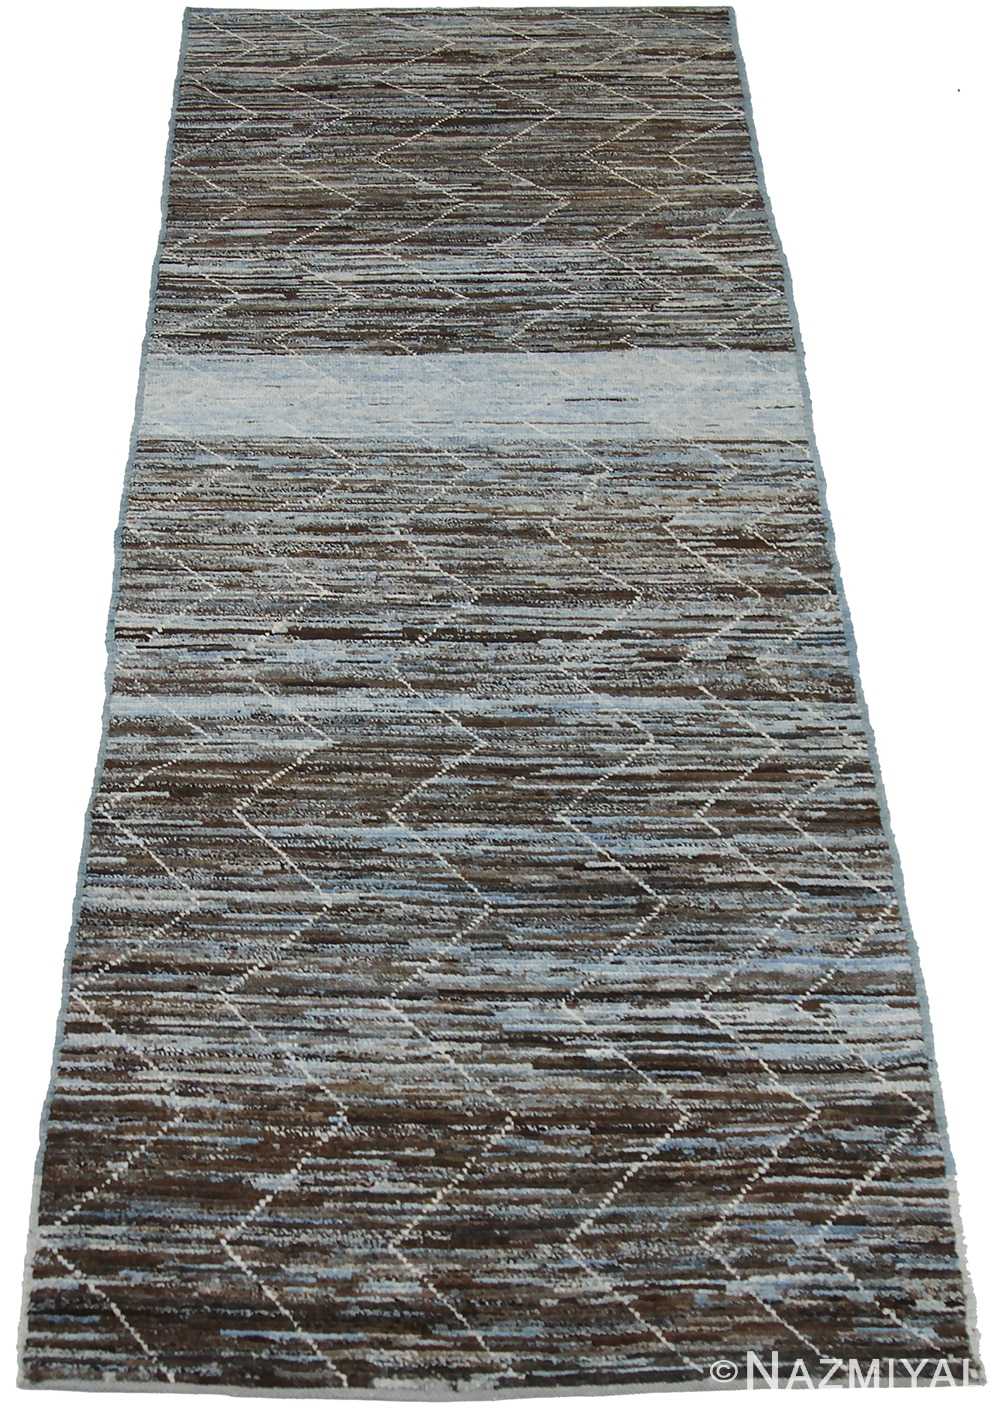 Whole View Of Brown and Blue Modern Moroccan Style Afghan Rug 60119 by Nazmiyal NYC